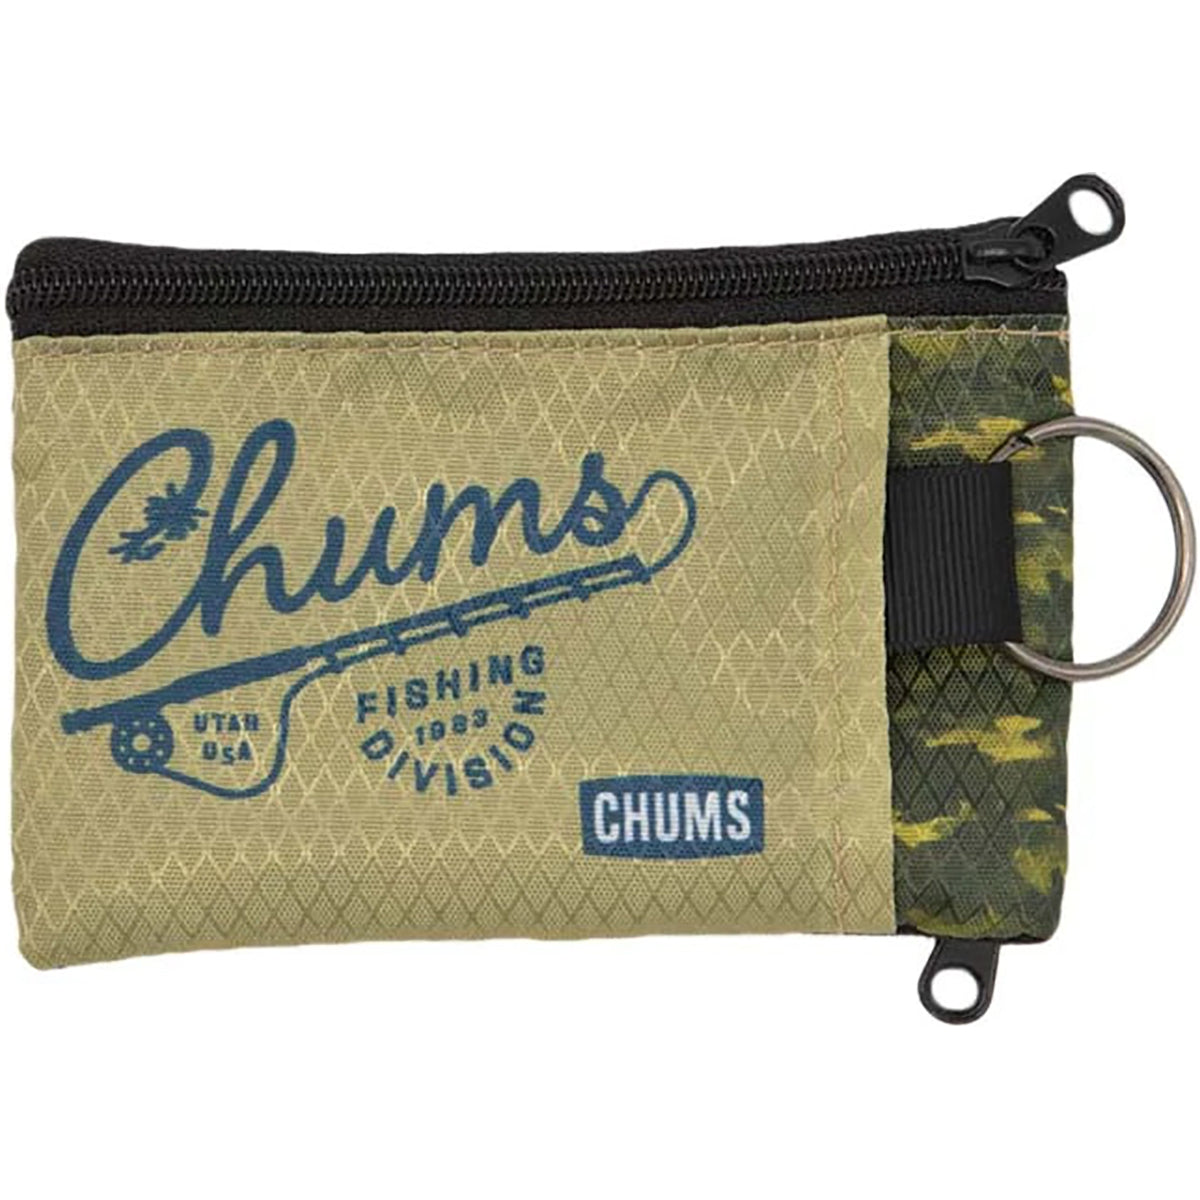 Chums Surfshorts Compact Rip-Stop Nylon Wallet Chums